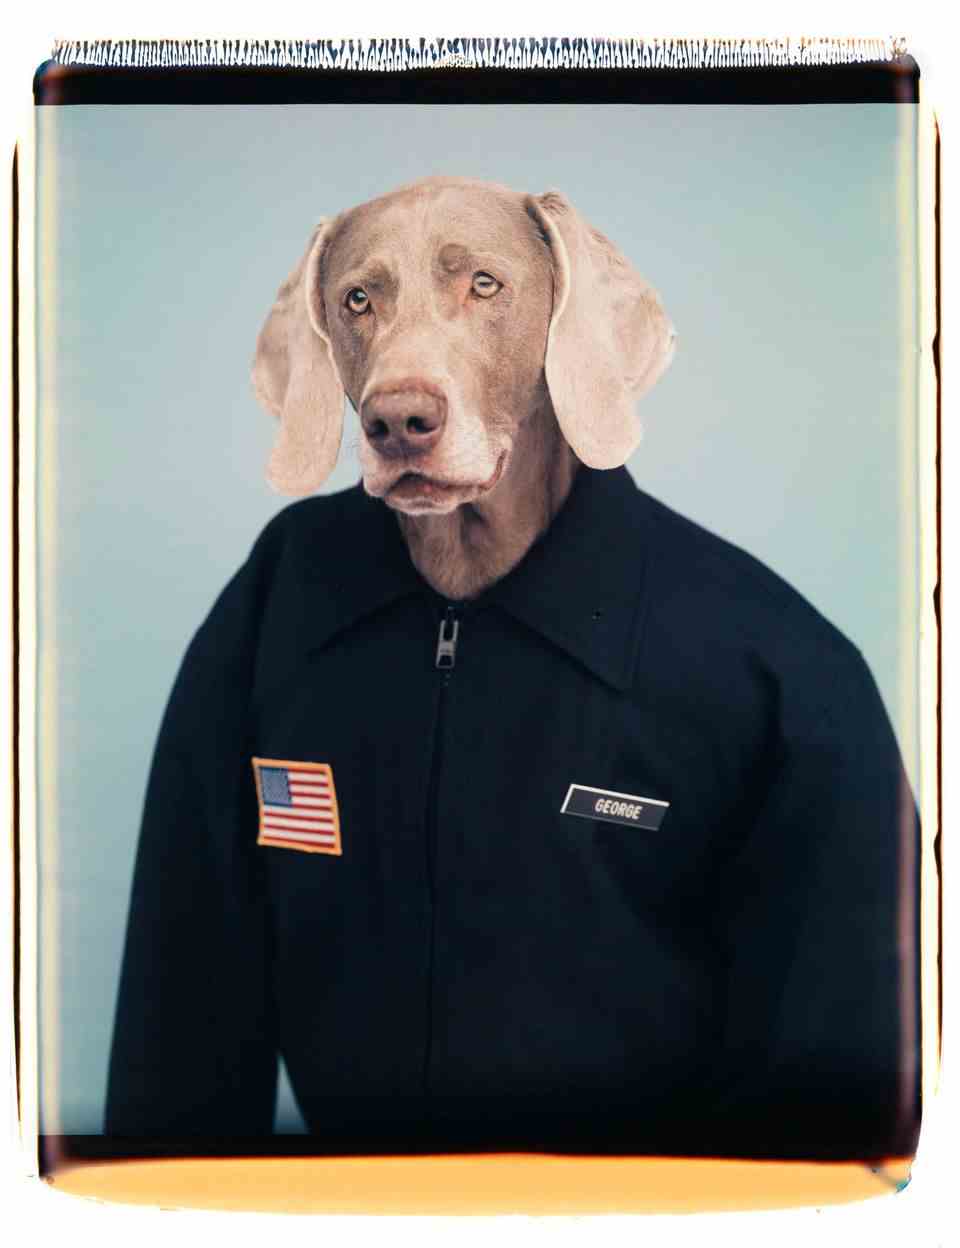 A Weimaraner in a sweater with an American flag and name tag "George"